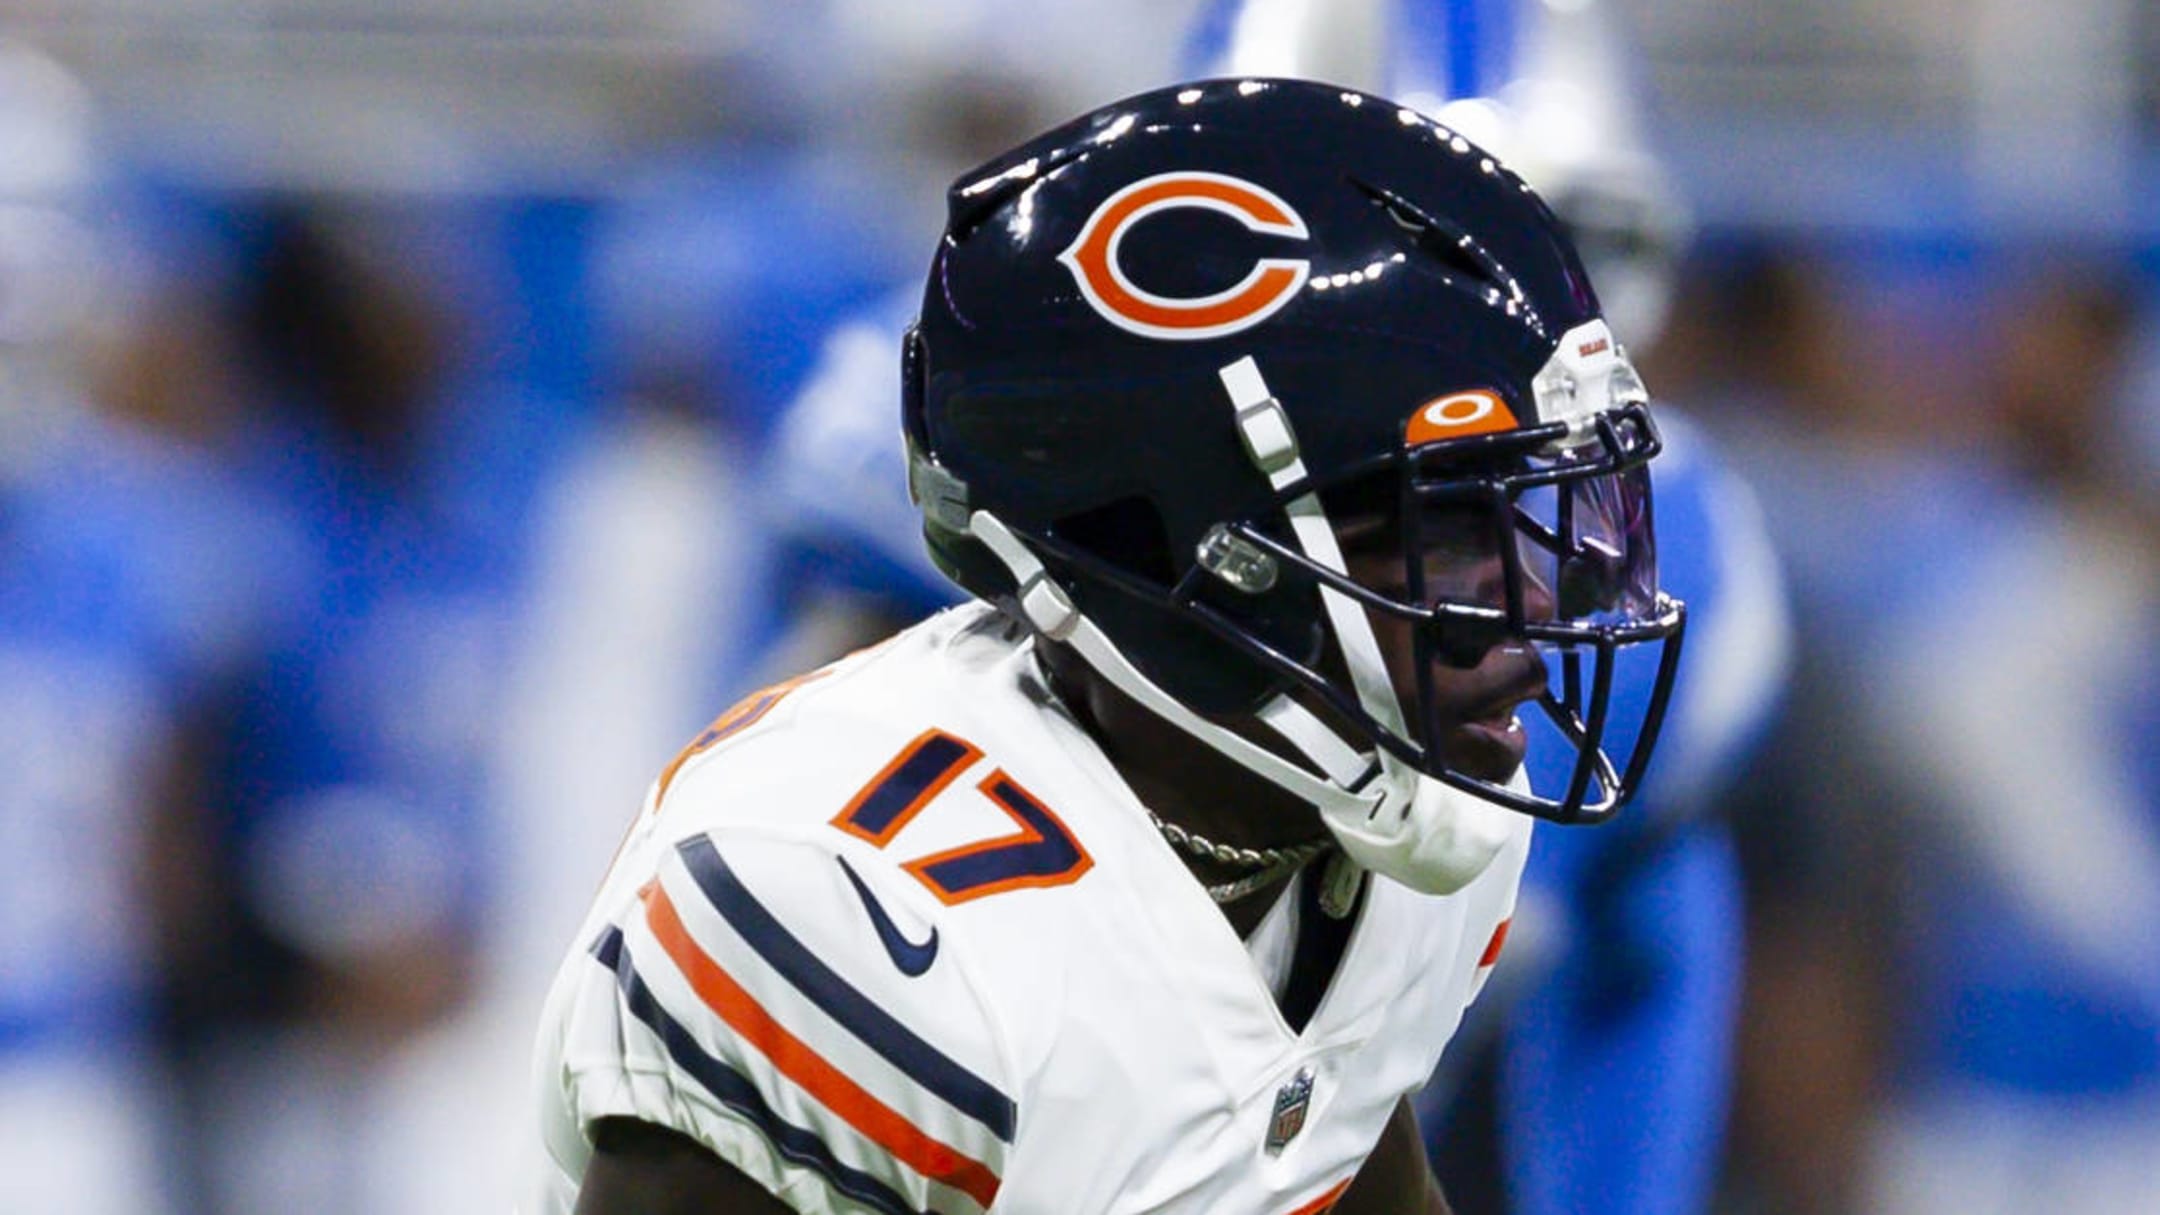 Watch: Chicago Bears' Jakeem Grant with 97-yard punt return for TD